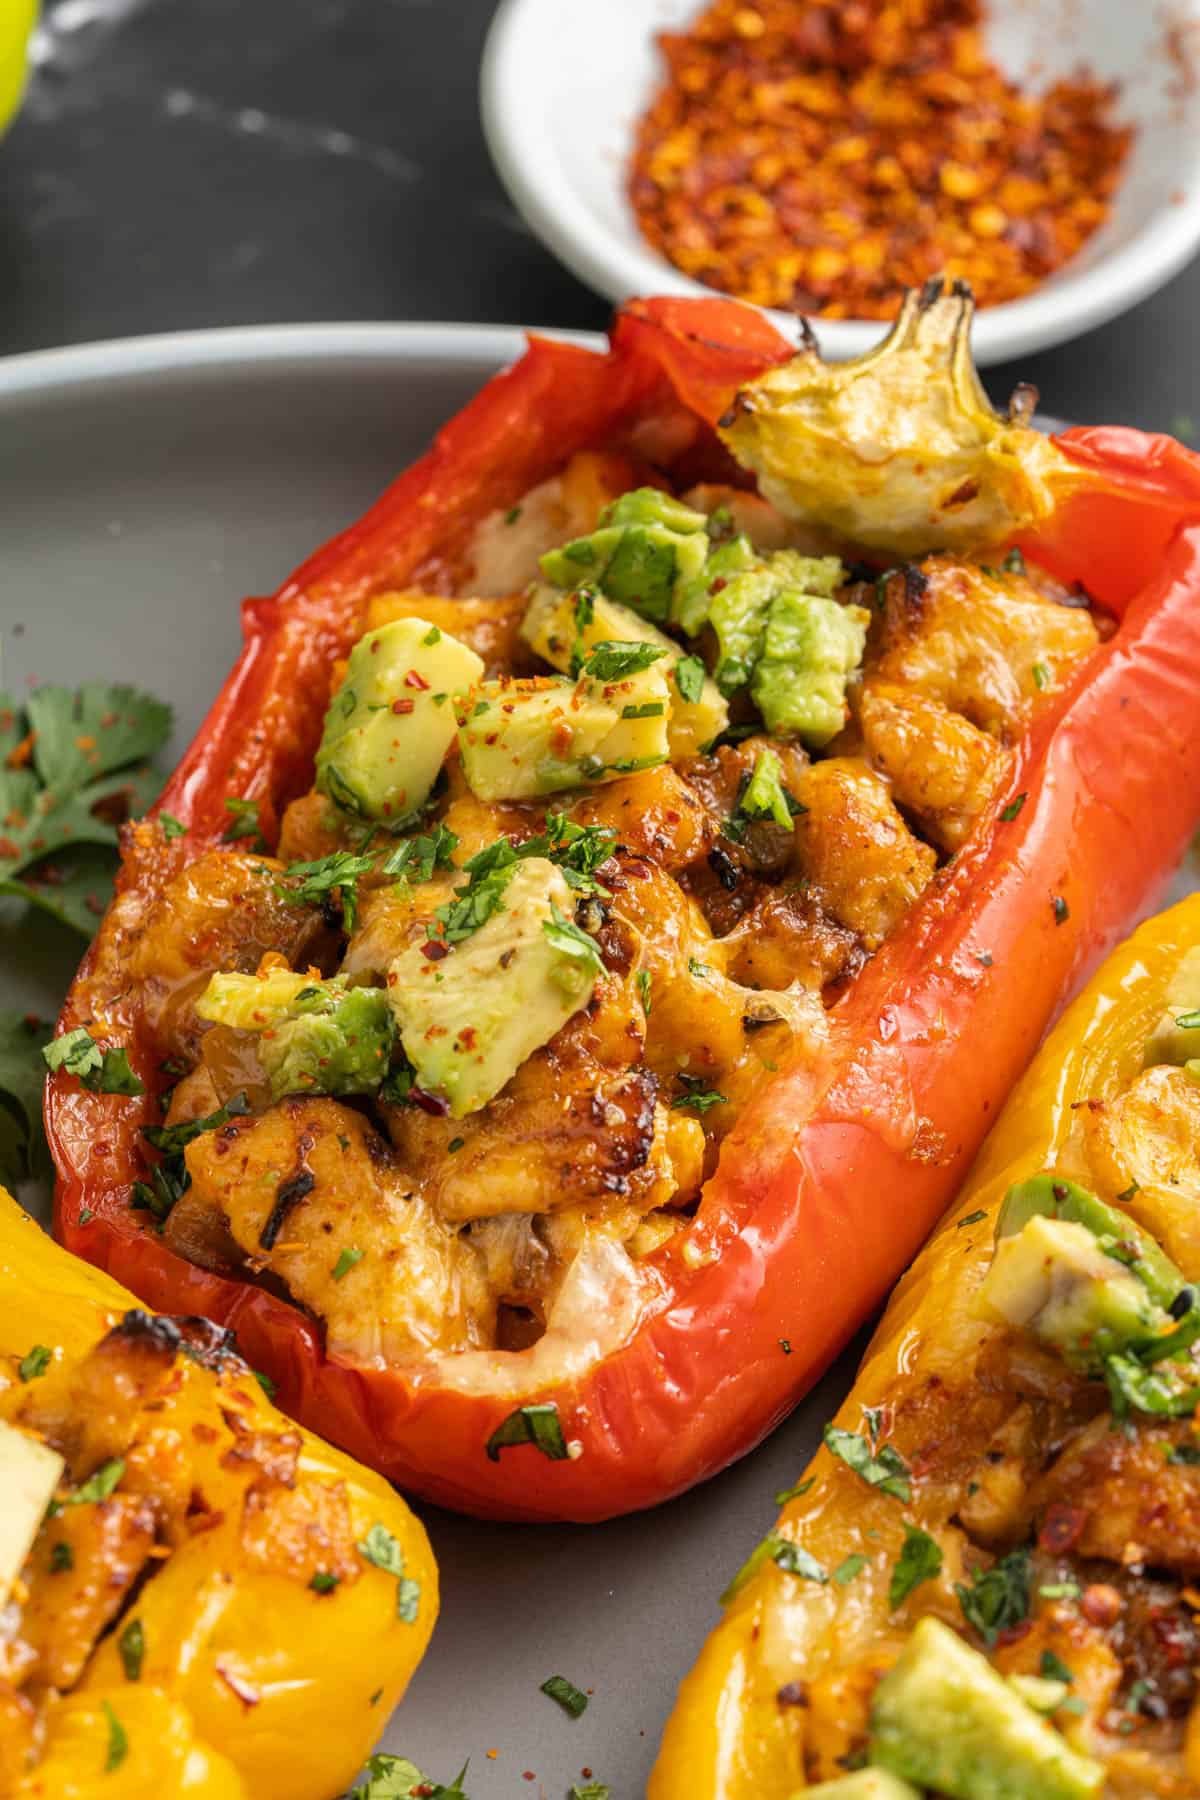 A red bell pepper filled with fajita chicken and topped with cheese and diced avocado.